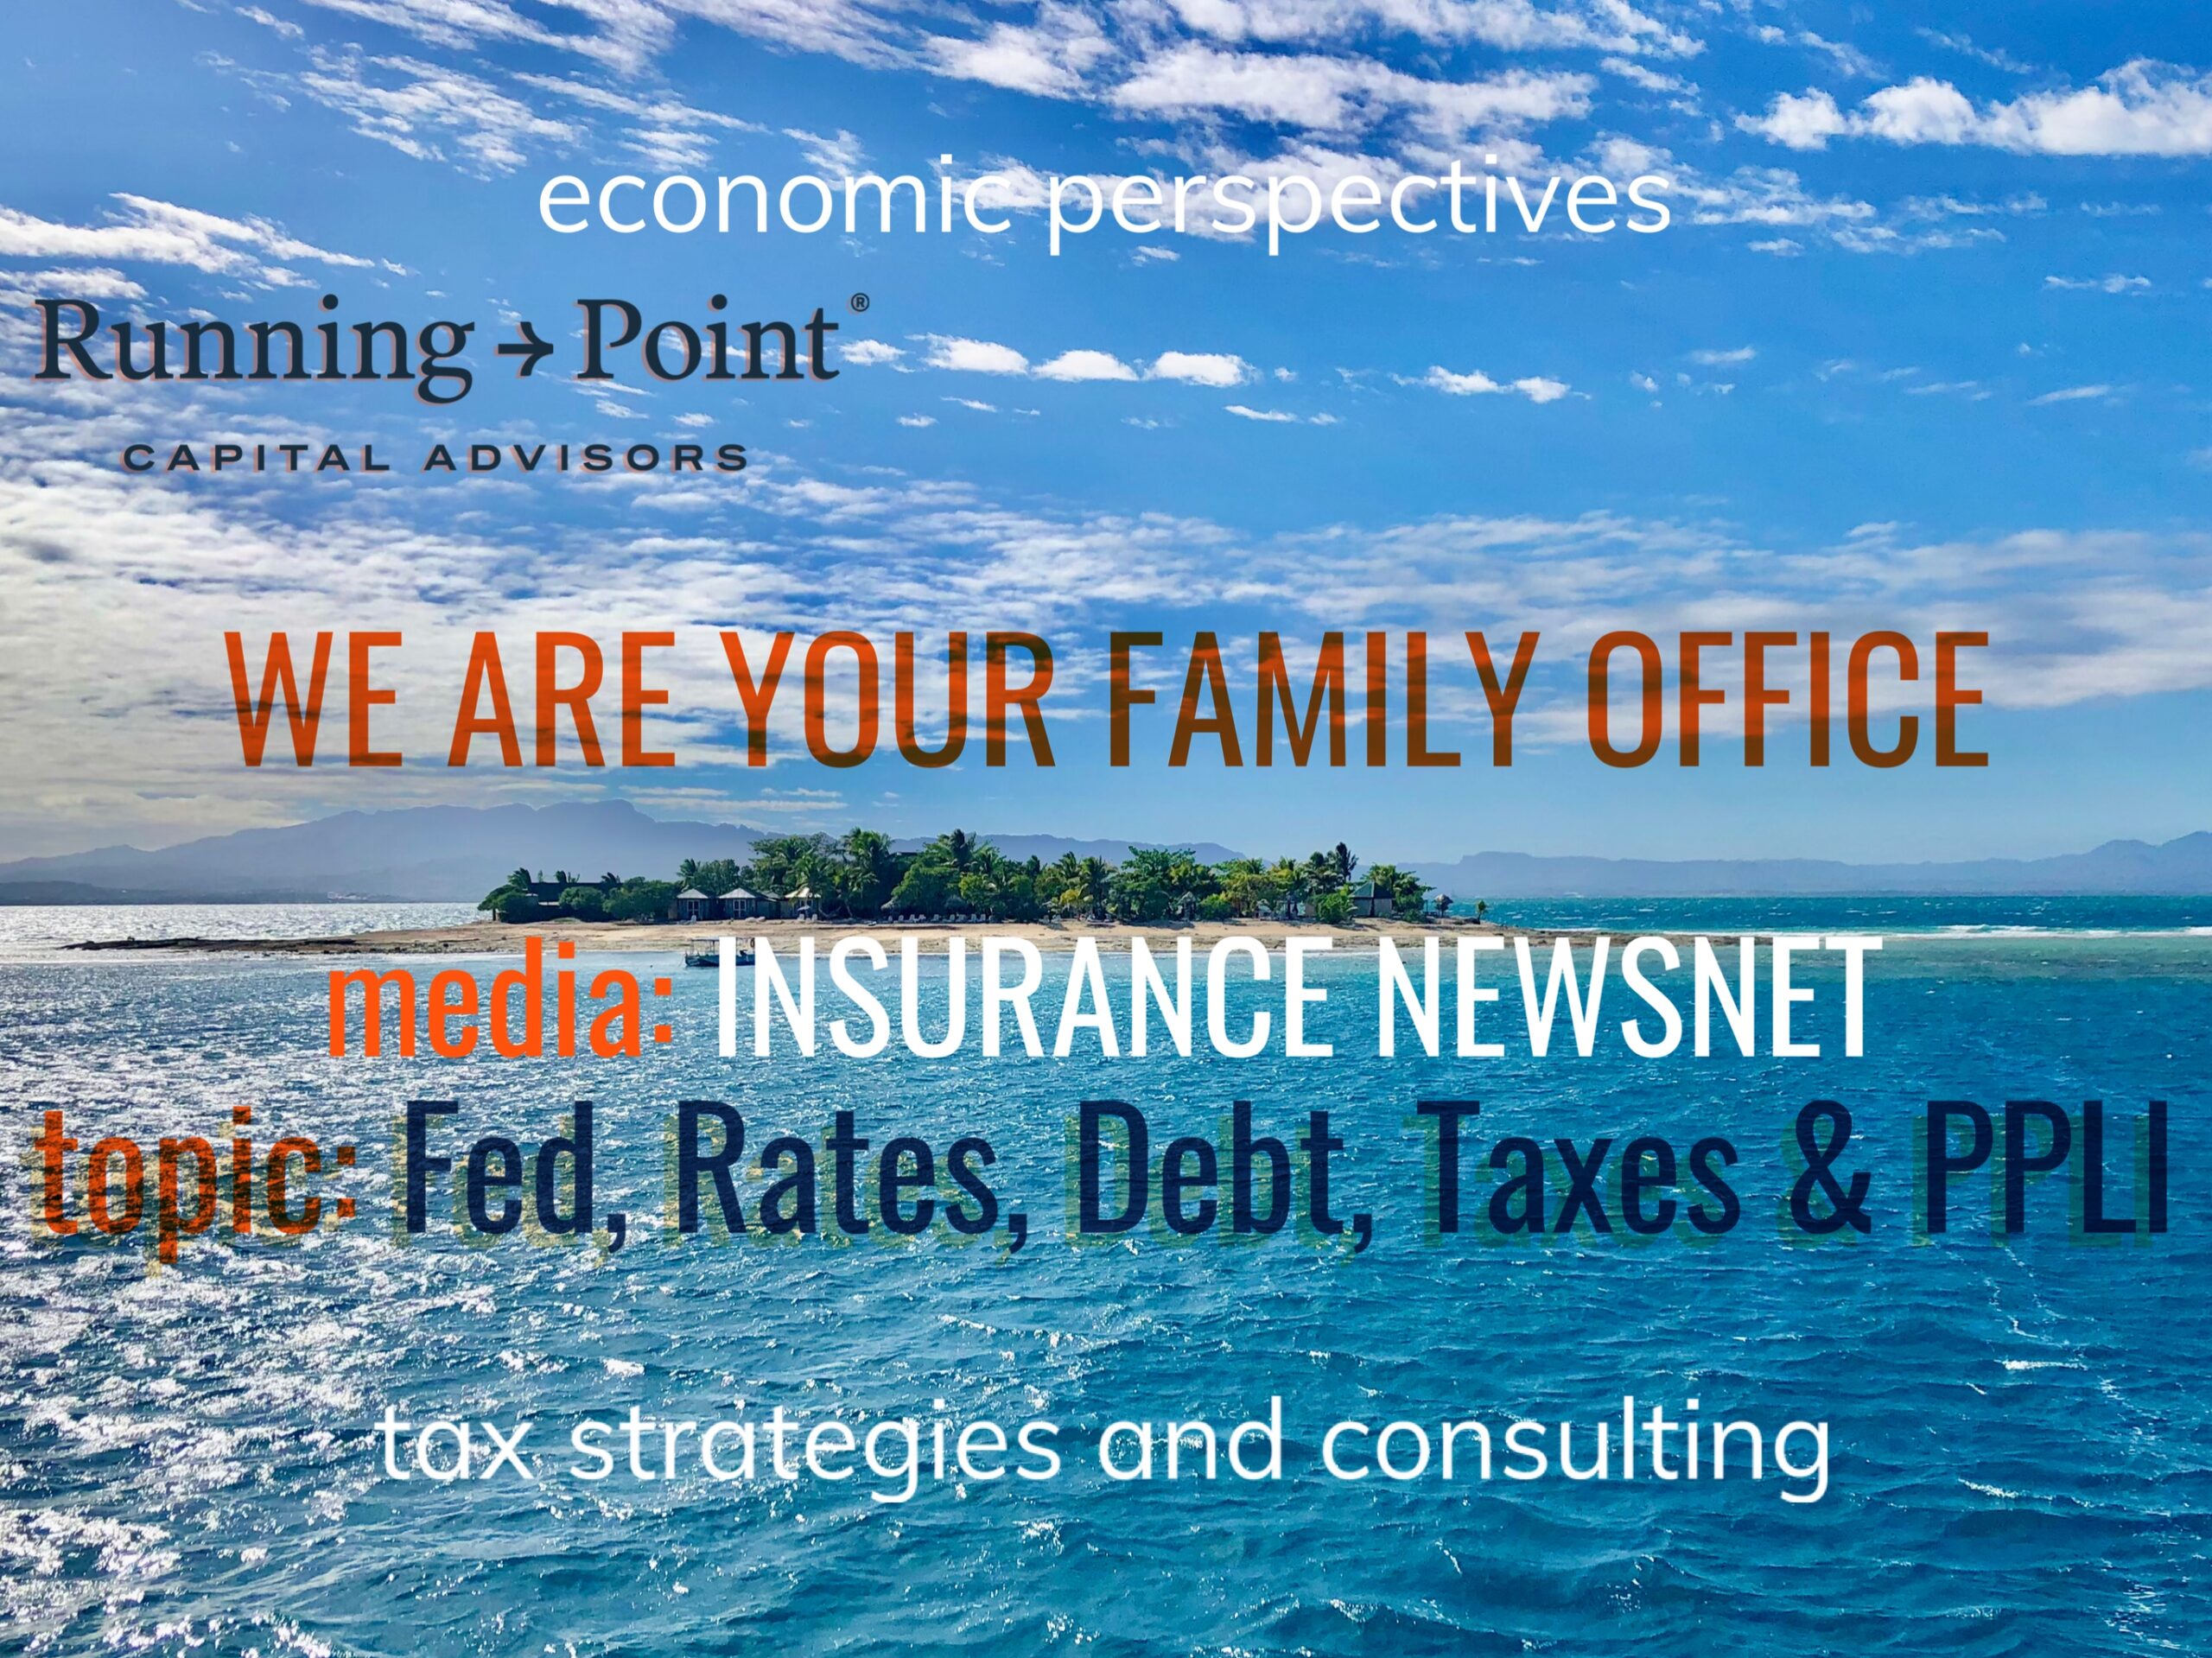 INSURANCE NEWSNET: The Fed, Interest Rates, Debt, Taxes, and PPLI